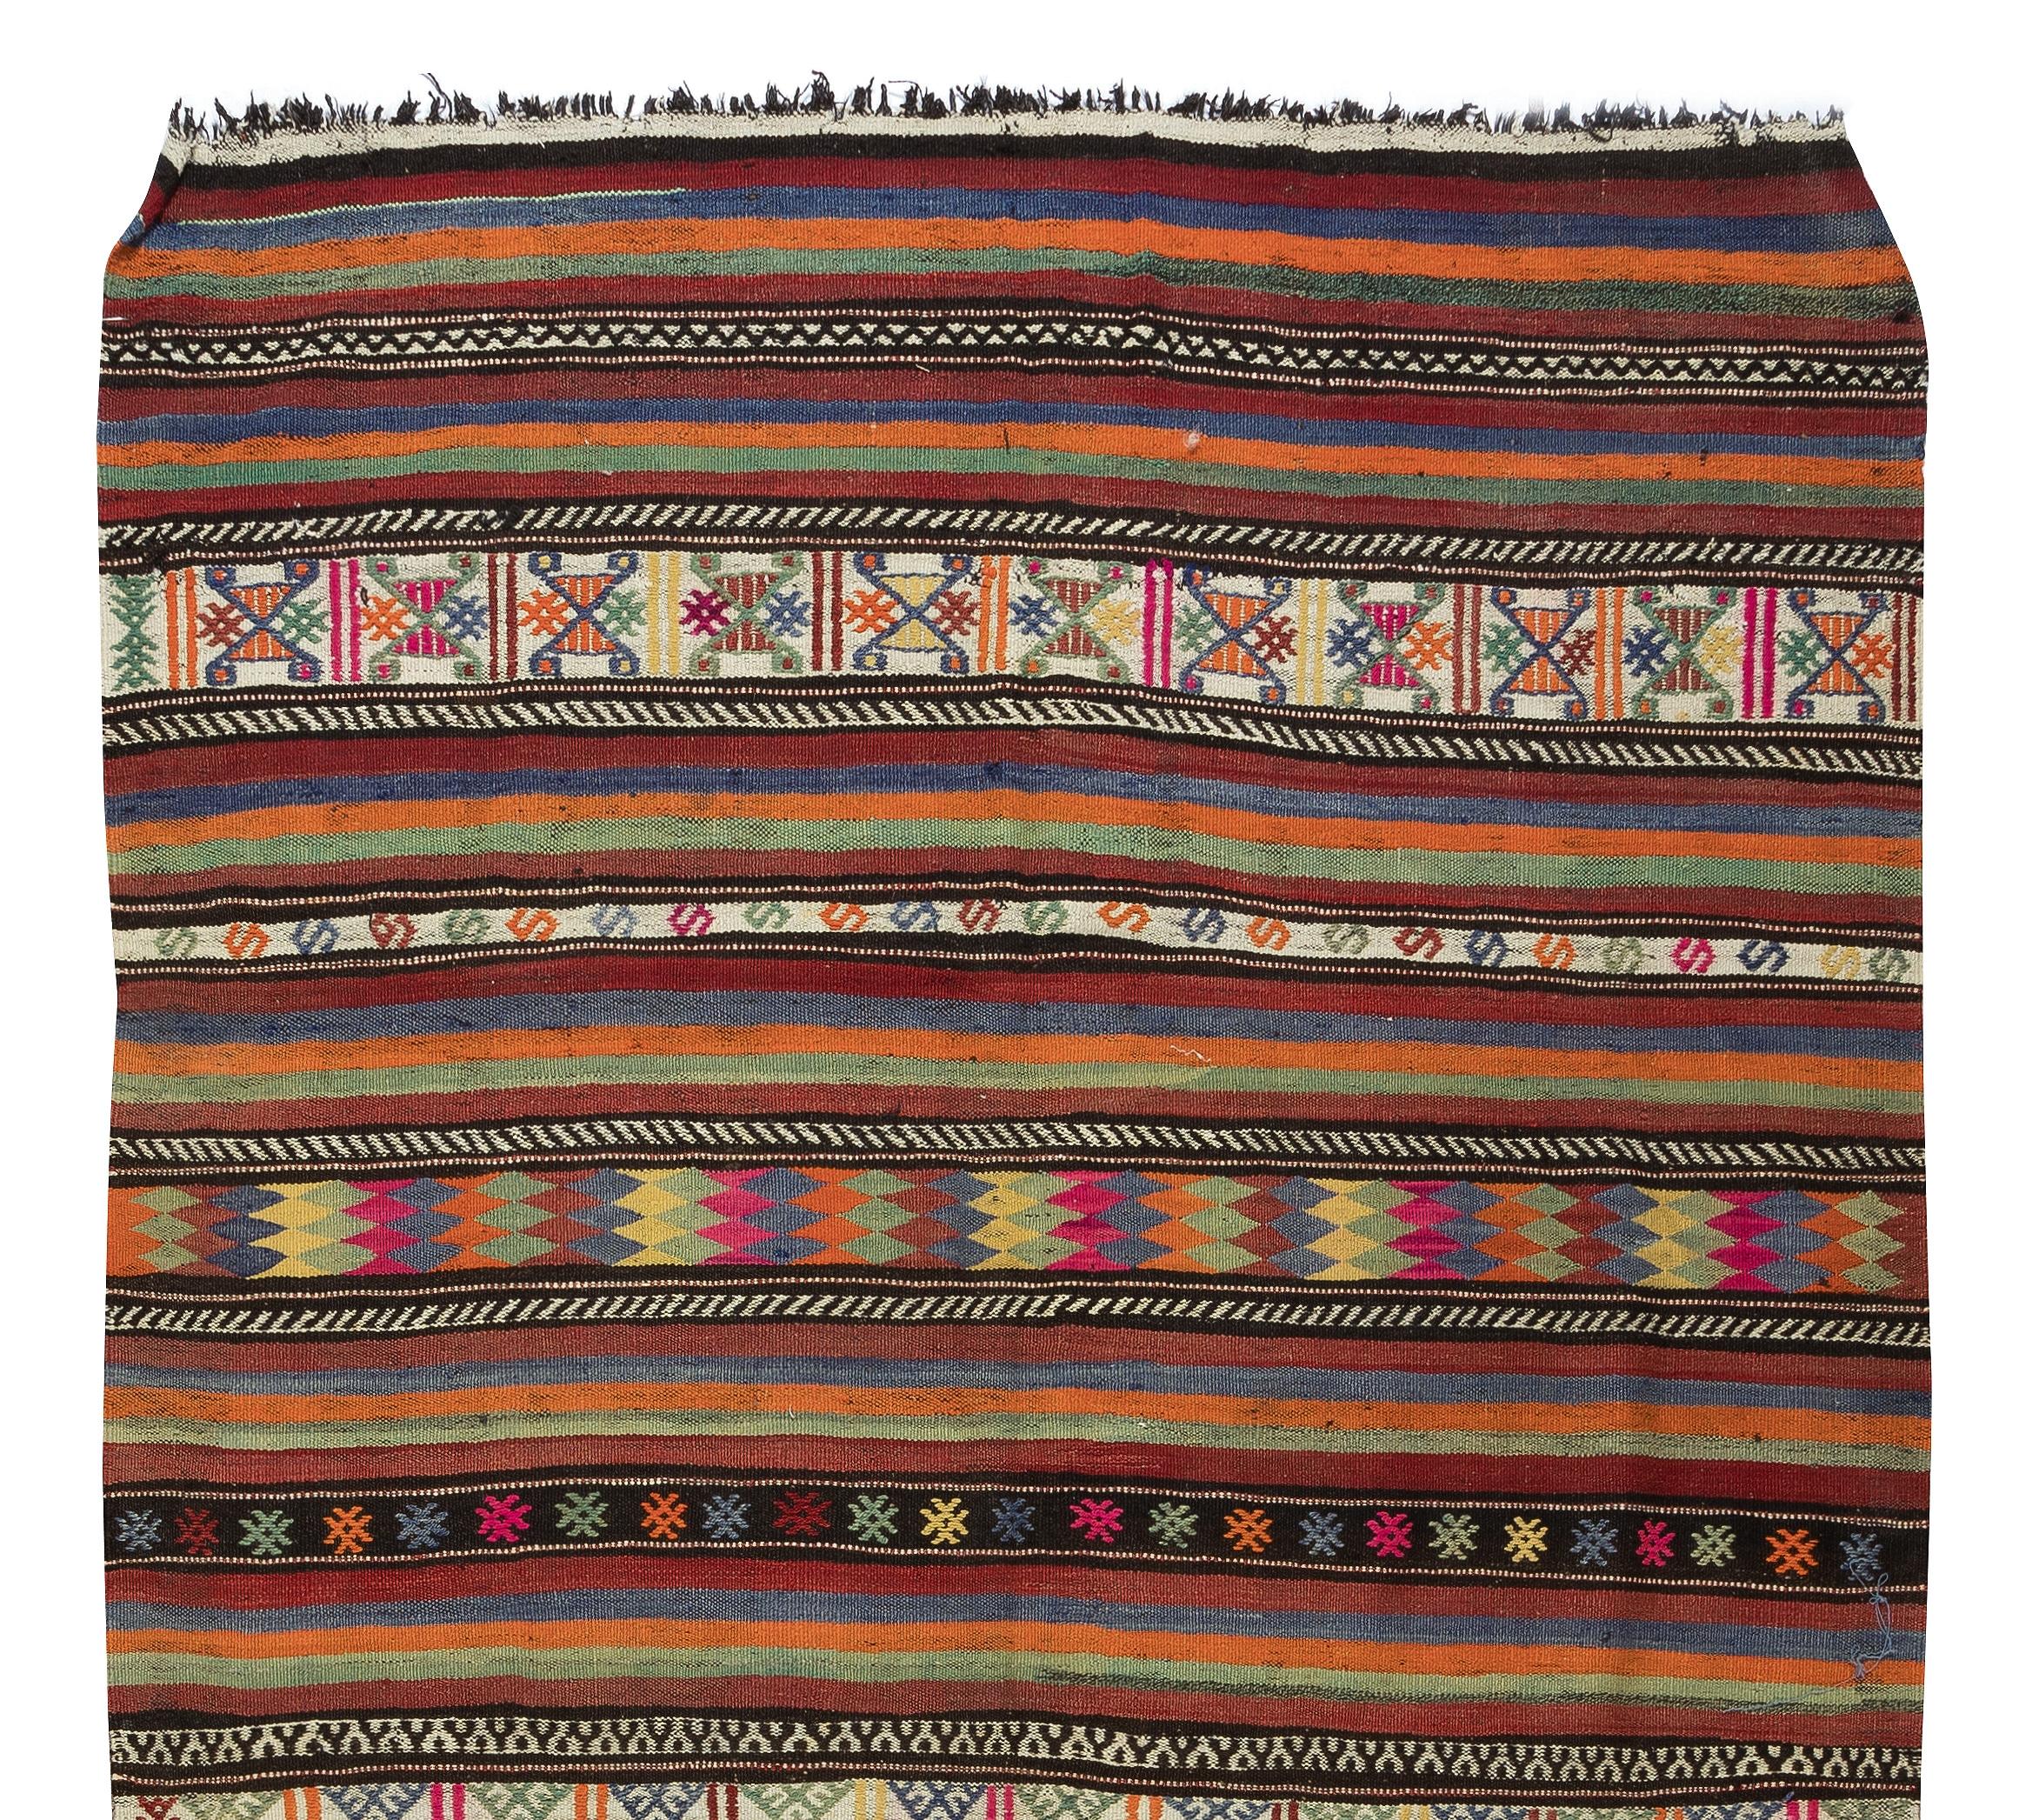 5.3x9.6 Ft Colorful Kilim Made of Hand-Spun Wool, Hand-Woven Turkish Striped Rug For Sale 1